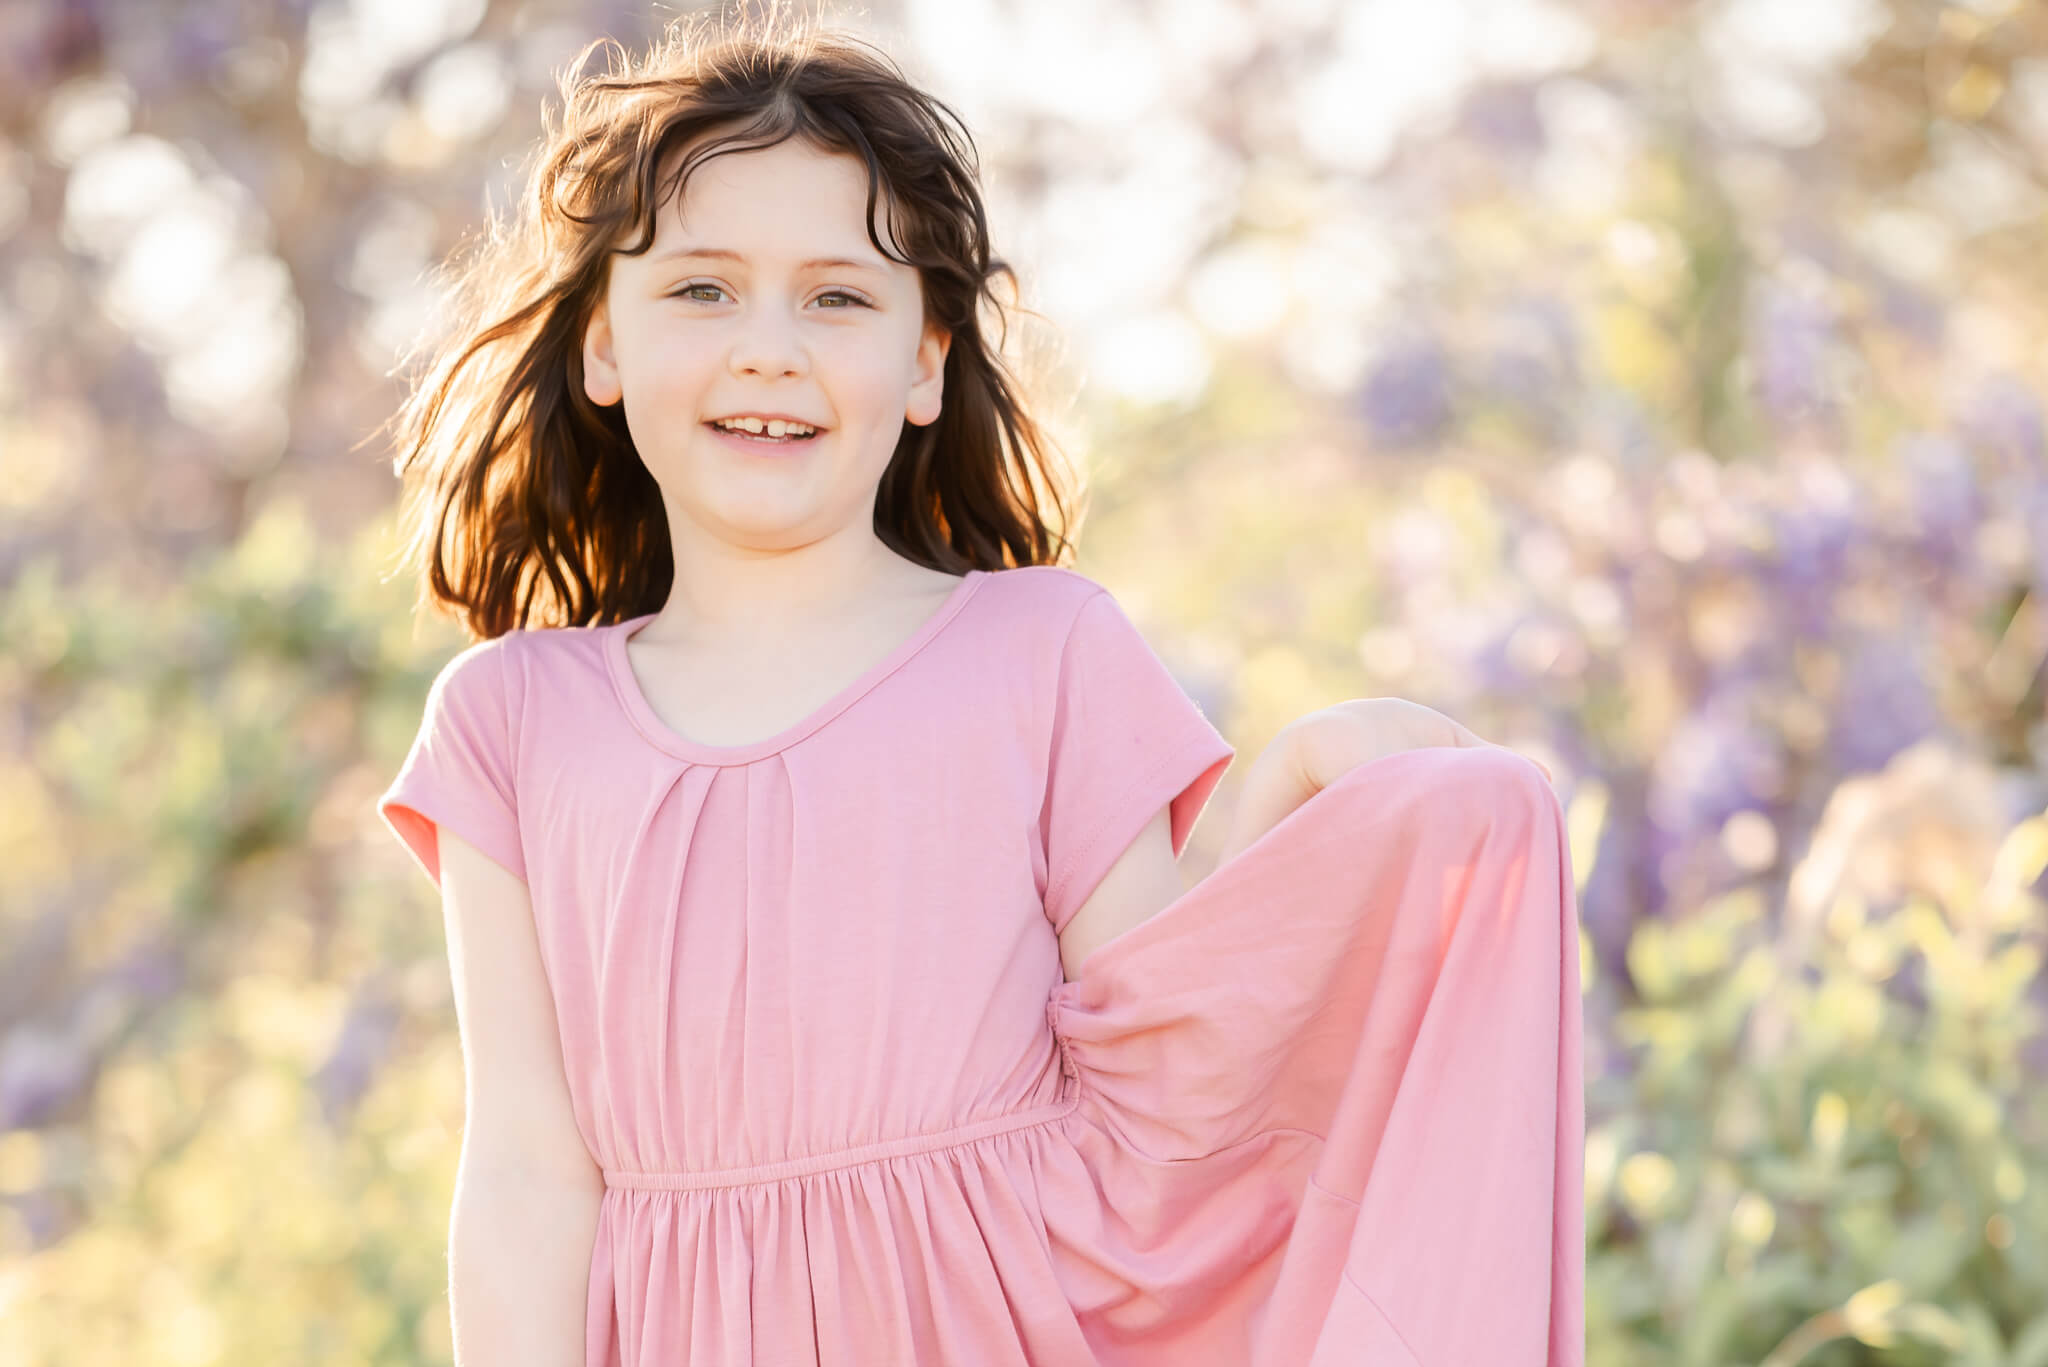 A young girl with shoulder length brown hair and bangs wears a long pink dress. She is standing in front of some wisteria. She is the right age for school age classes at the Little Gym in Chesapeake.